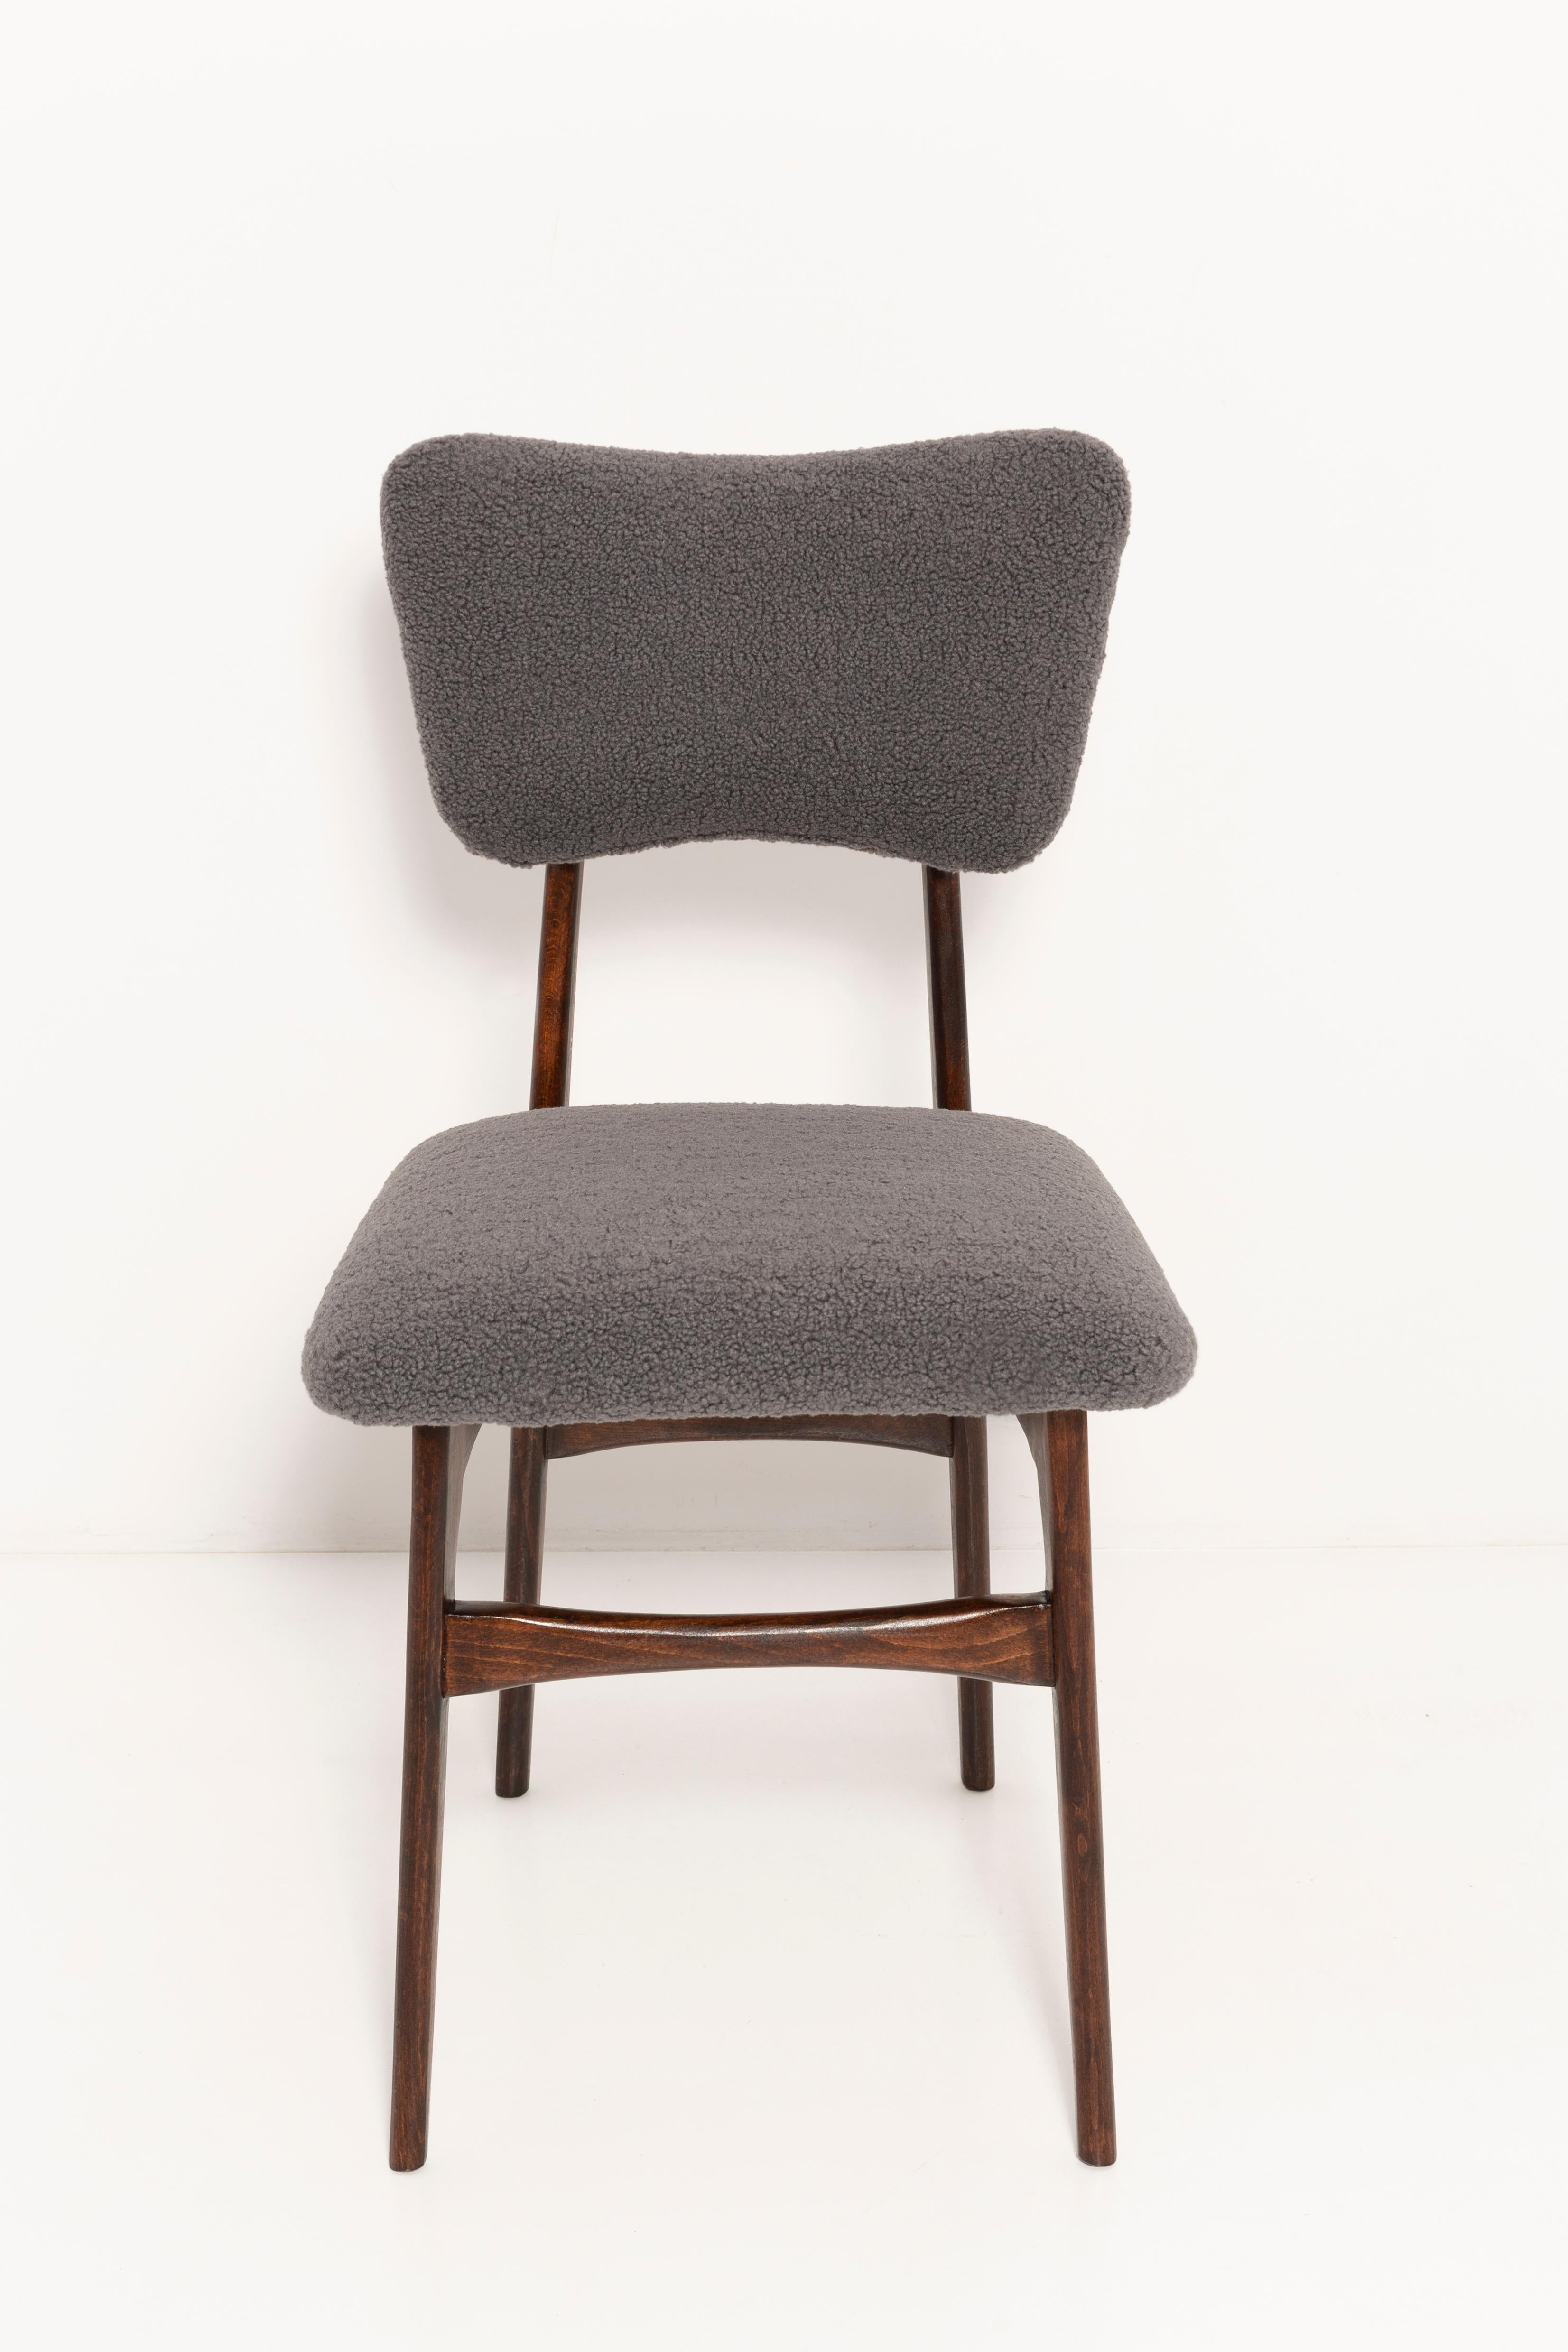 Four Mid-Century Dark Gray Boucle Butterfly Chairs, Europe, 1960s For Sale 4